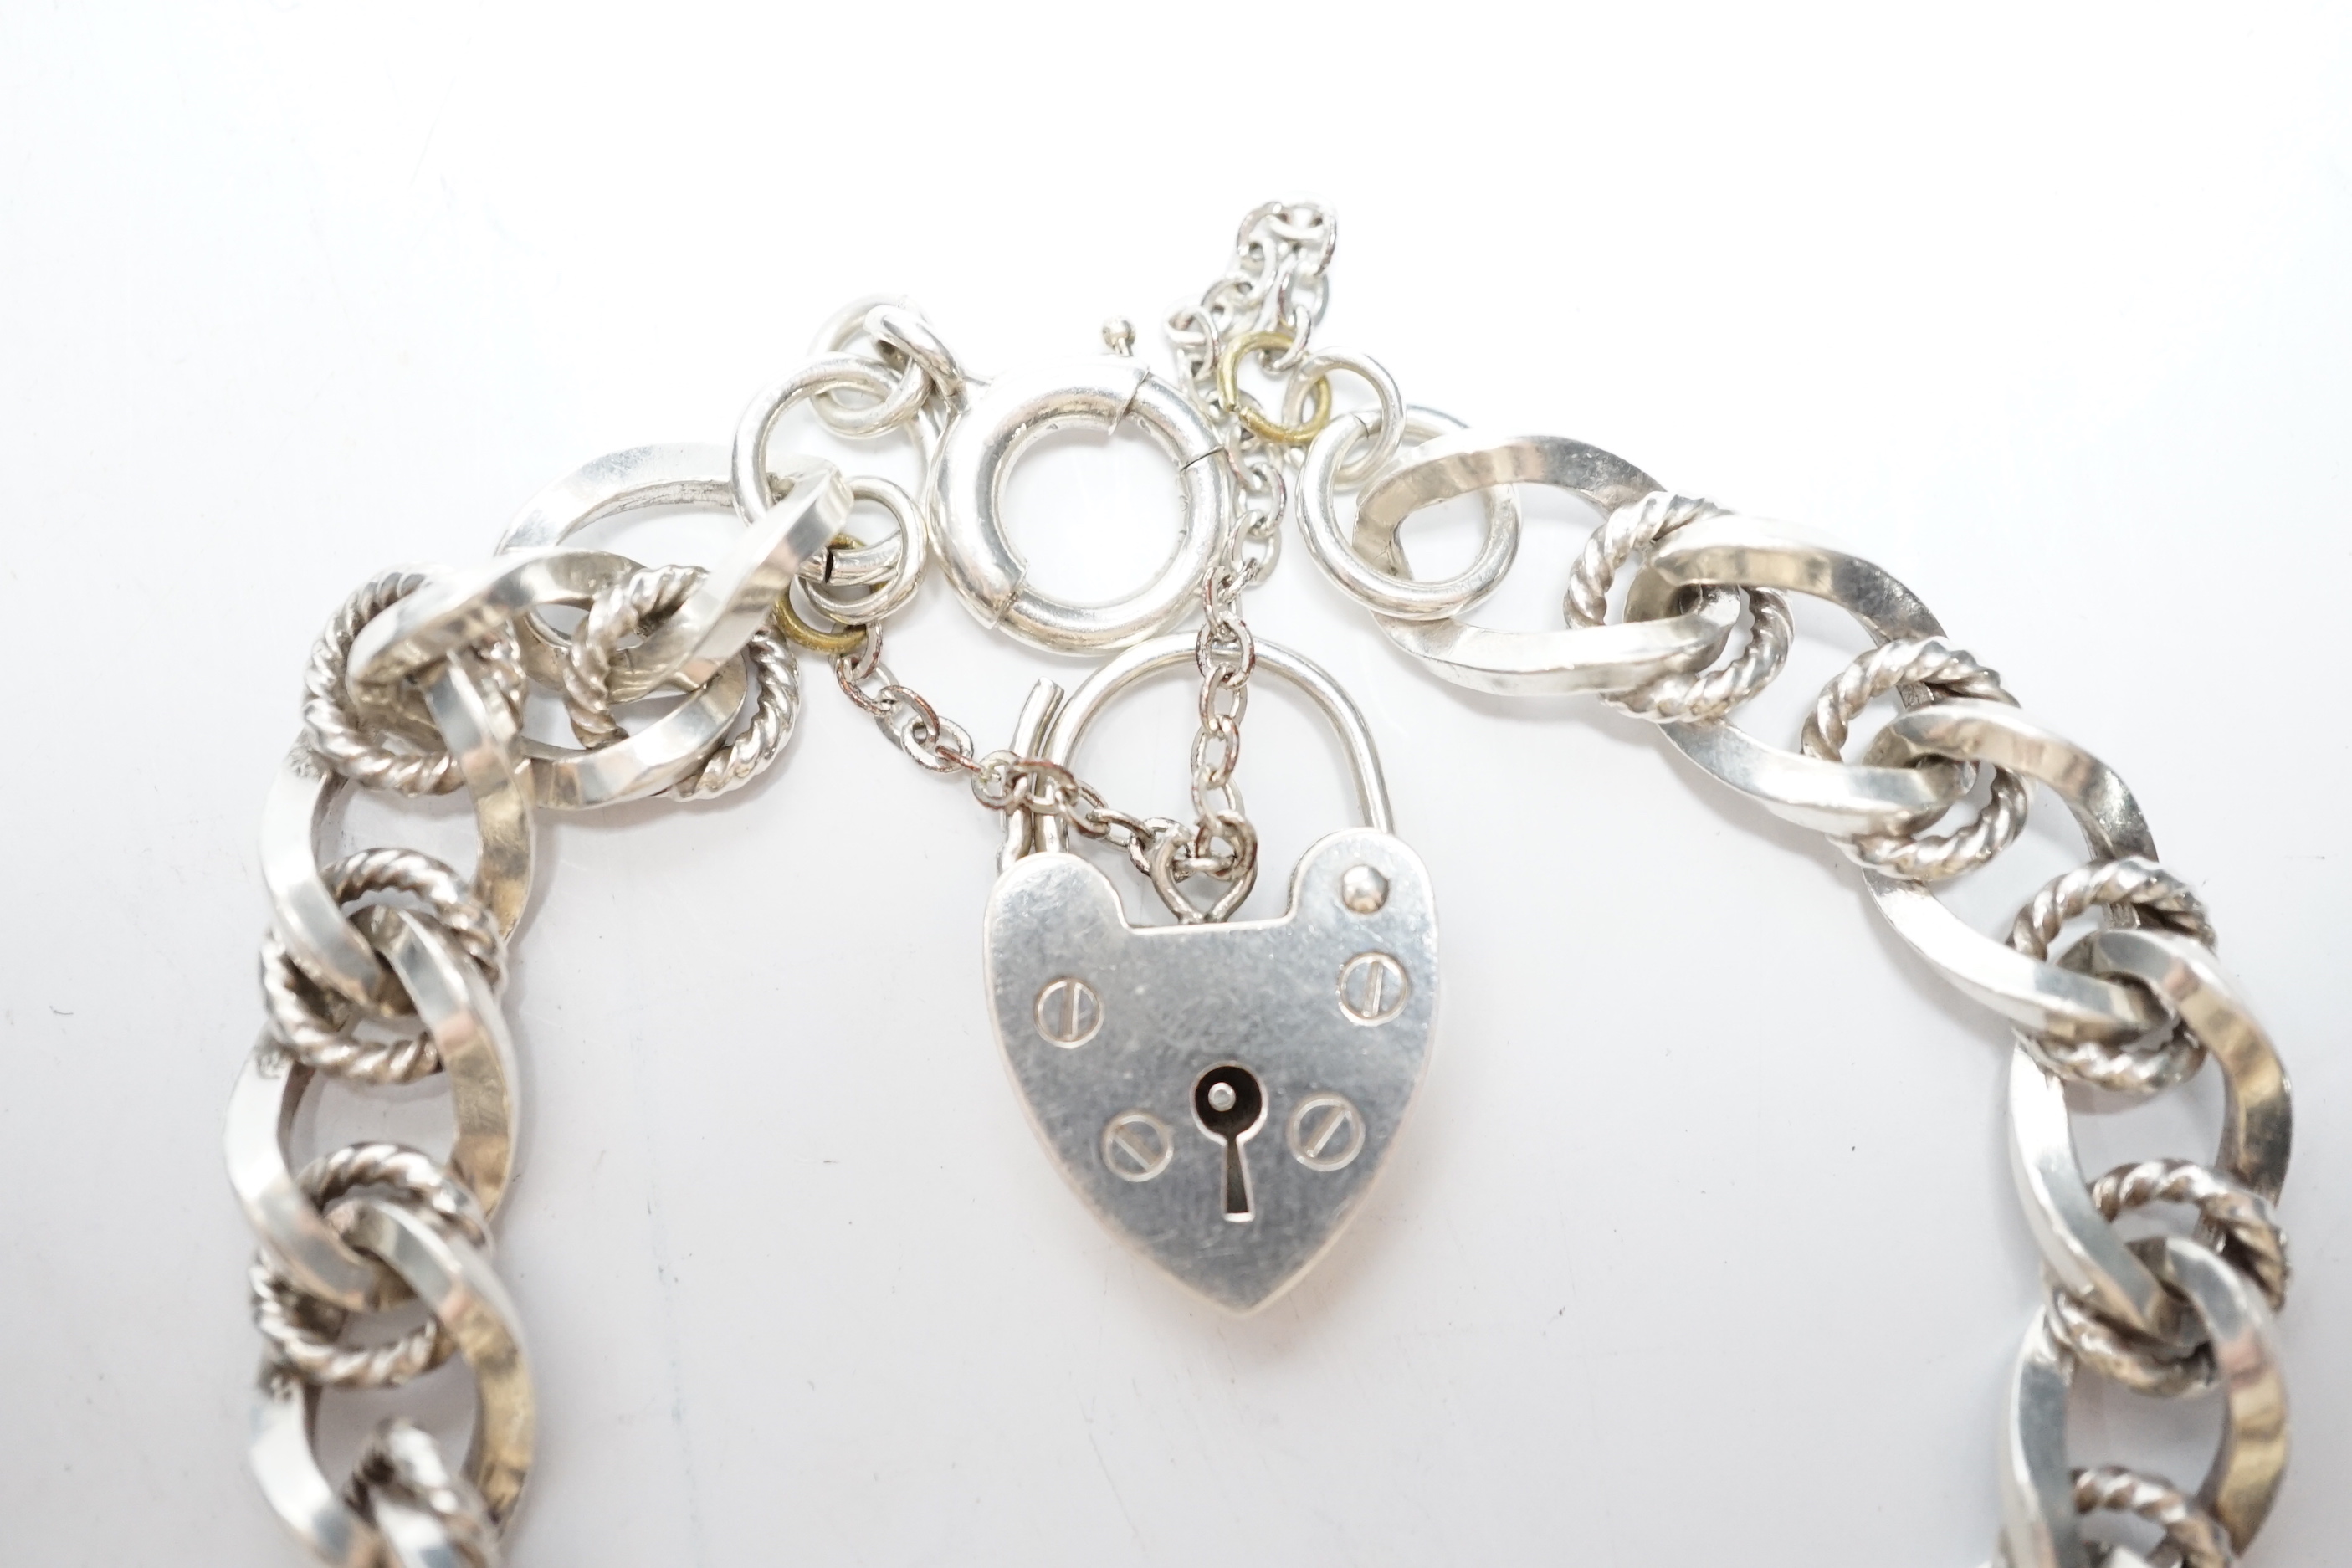 A modern silver curb and rope twist link bracelet, with heart shaped padlock clasp, 18cm.